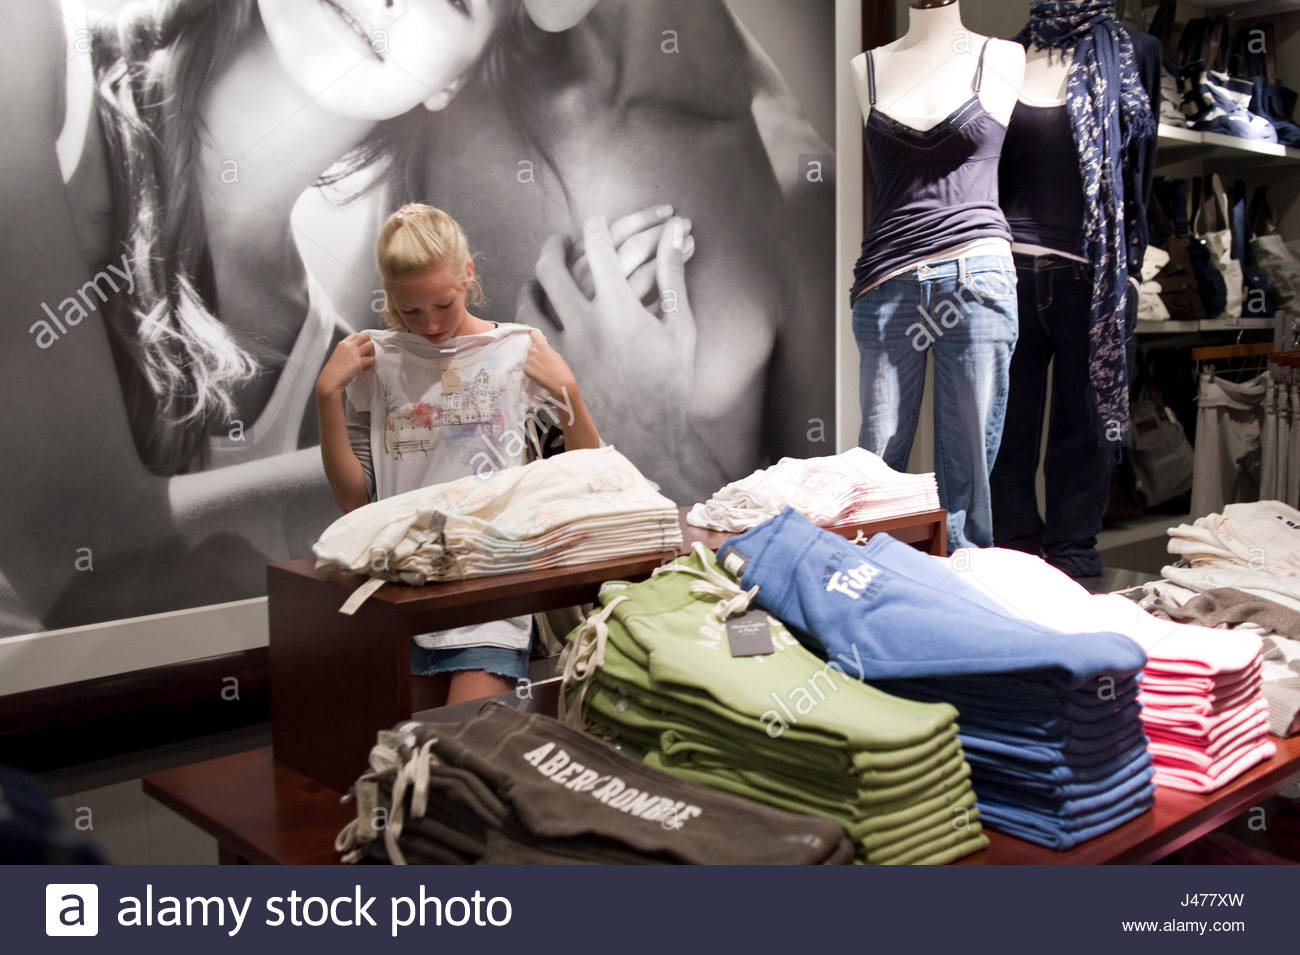 Teenage girl with blonde hair shopping for clothing at Abercrombie ...